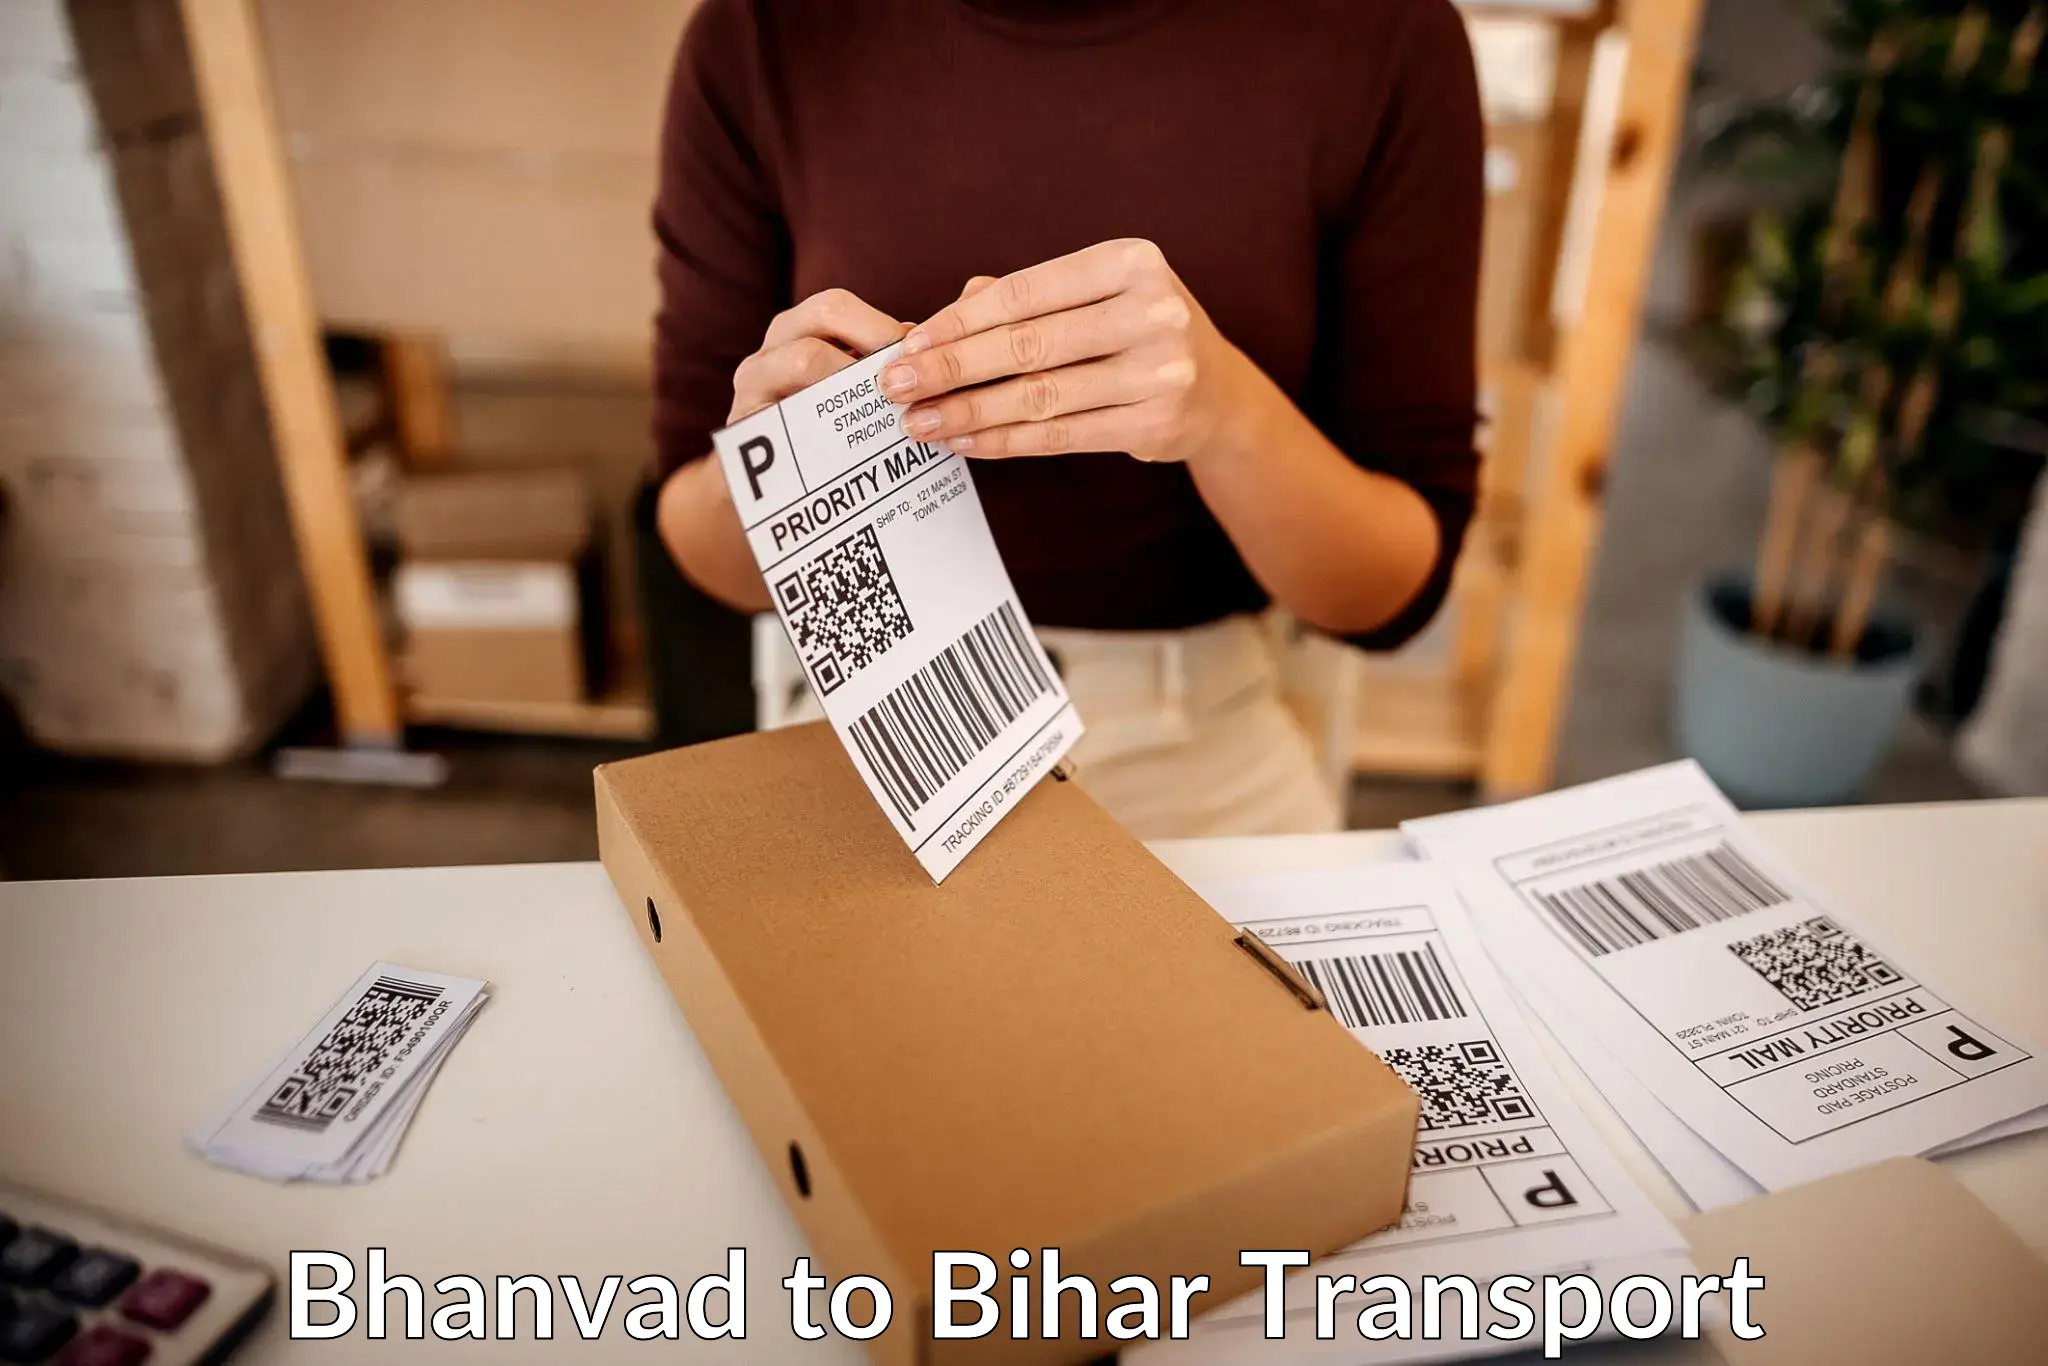 Cargo transportation services Bhanvad to Kamtaul